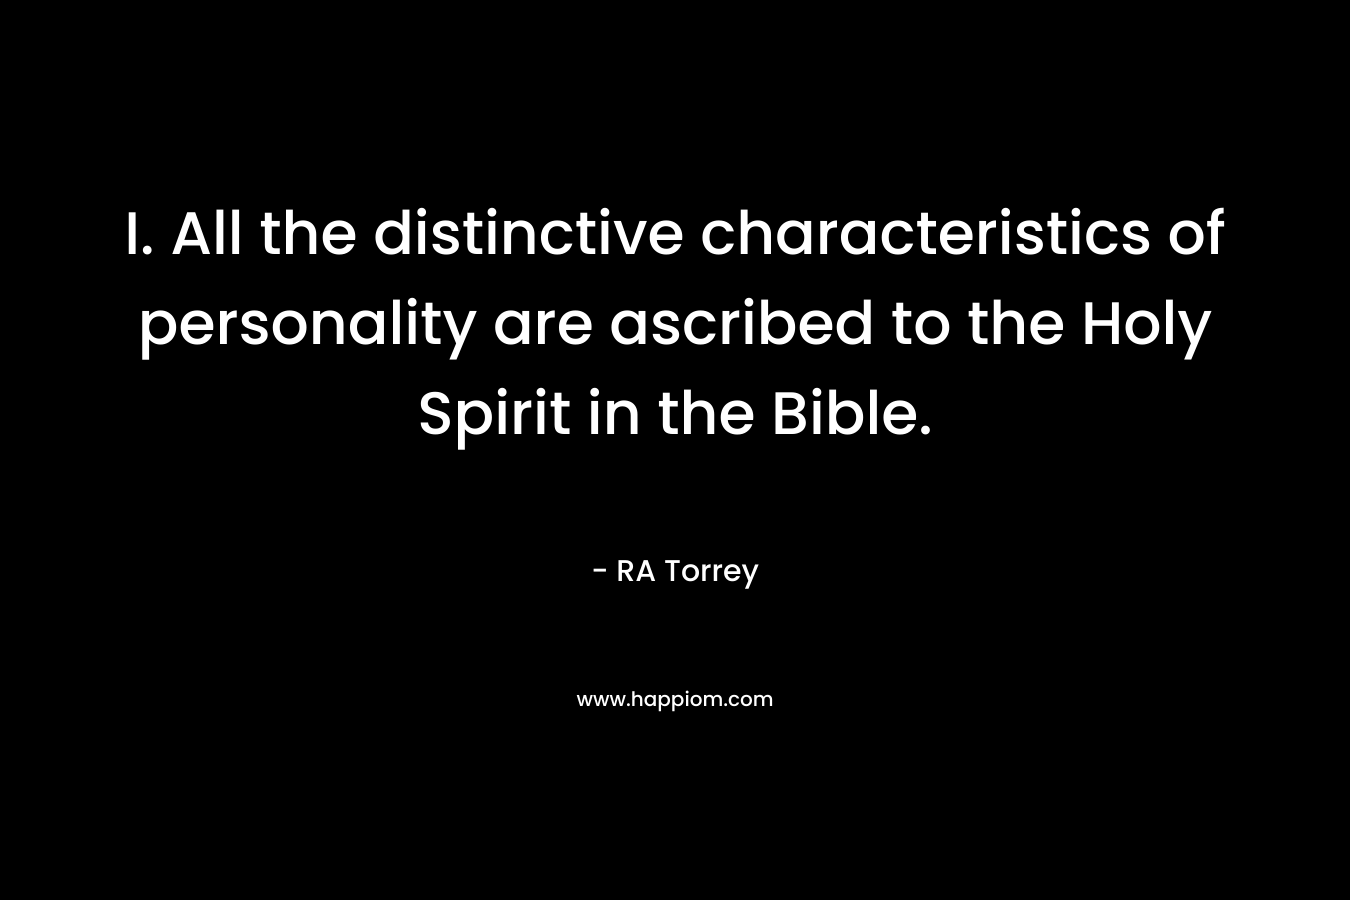 I. All the distinctive characteristics of personality are ascribed to the Holy Spirit in the Bible.